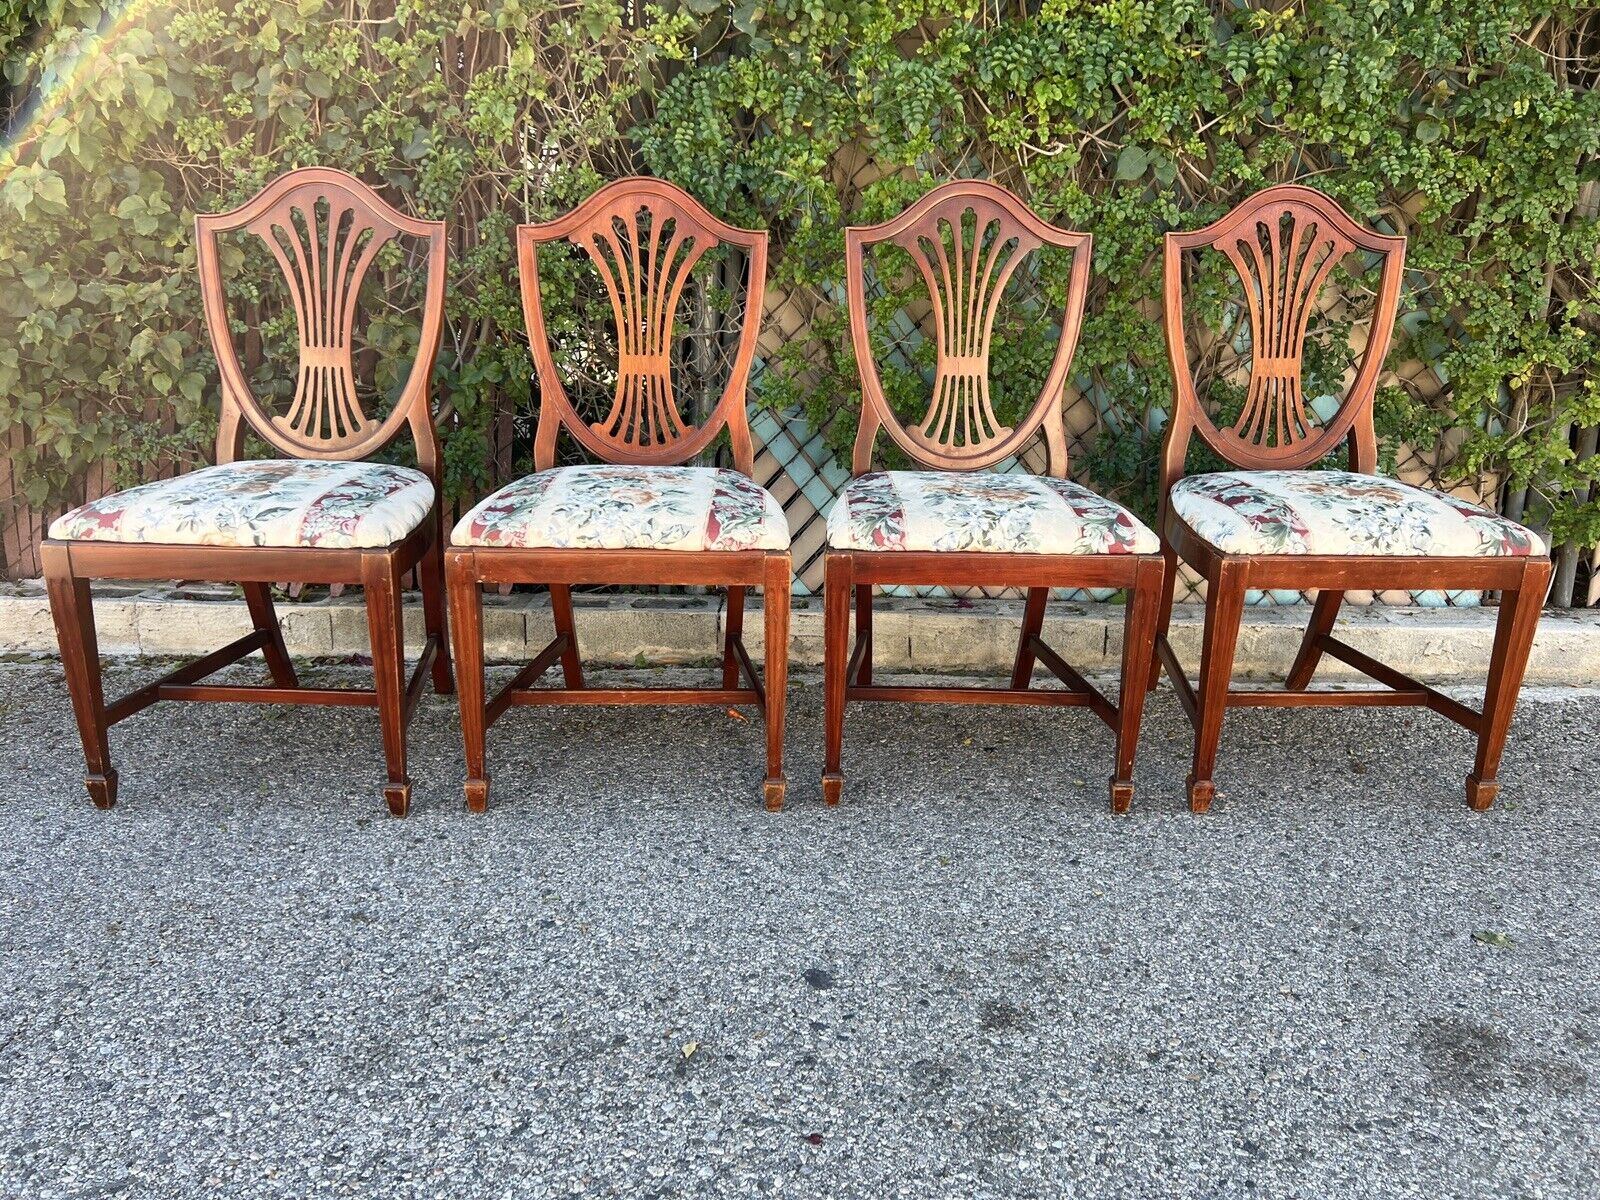 Four CHAIRS MAHOGANY SHIELD BACKS Chair Set Duncan Phyfe Styled